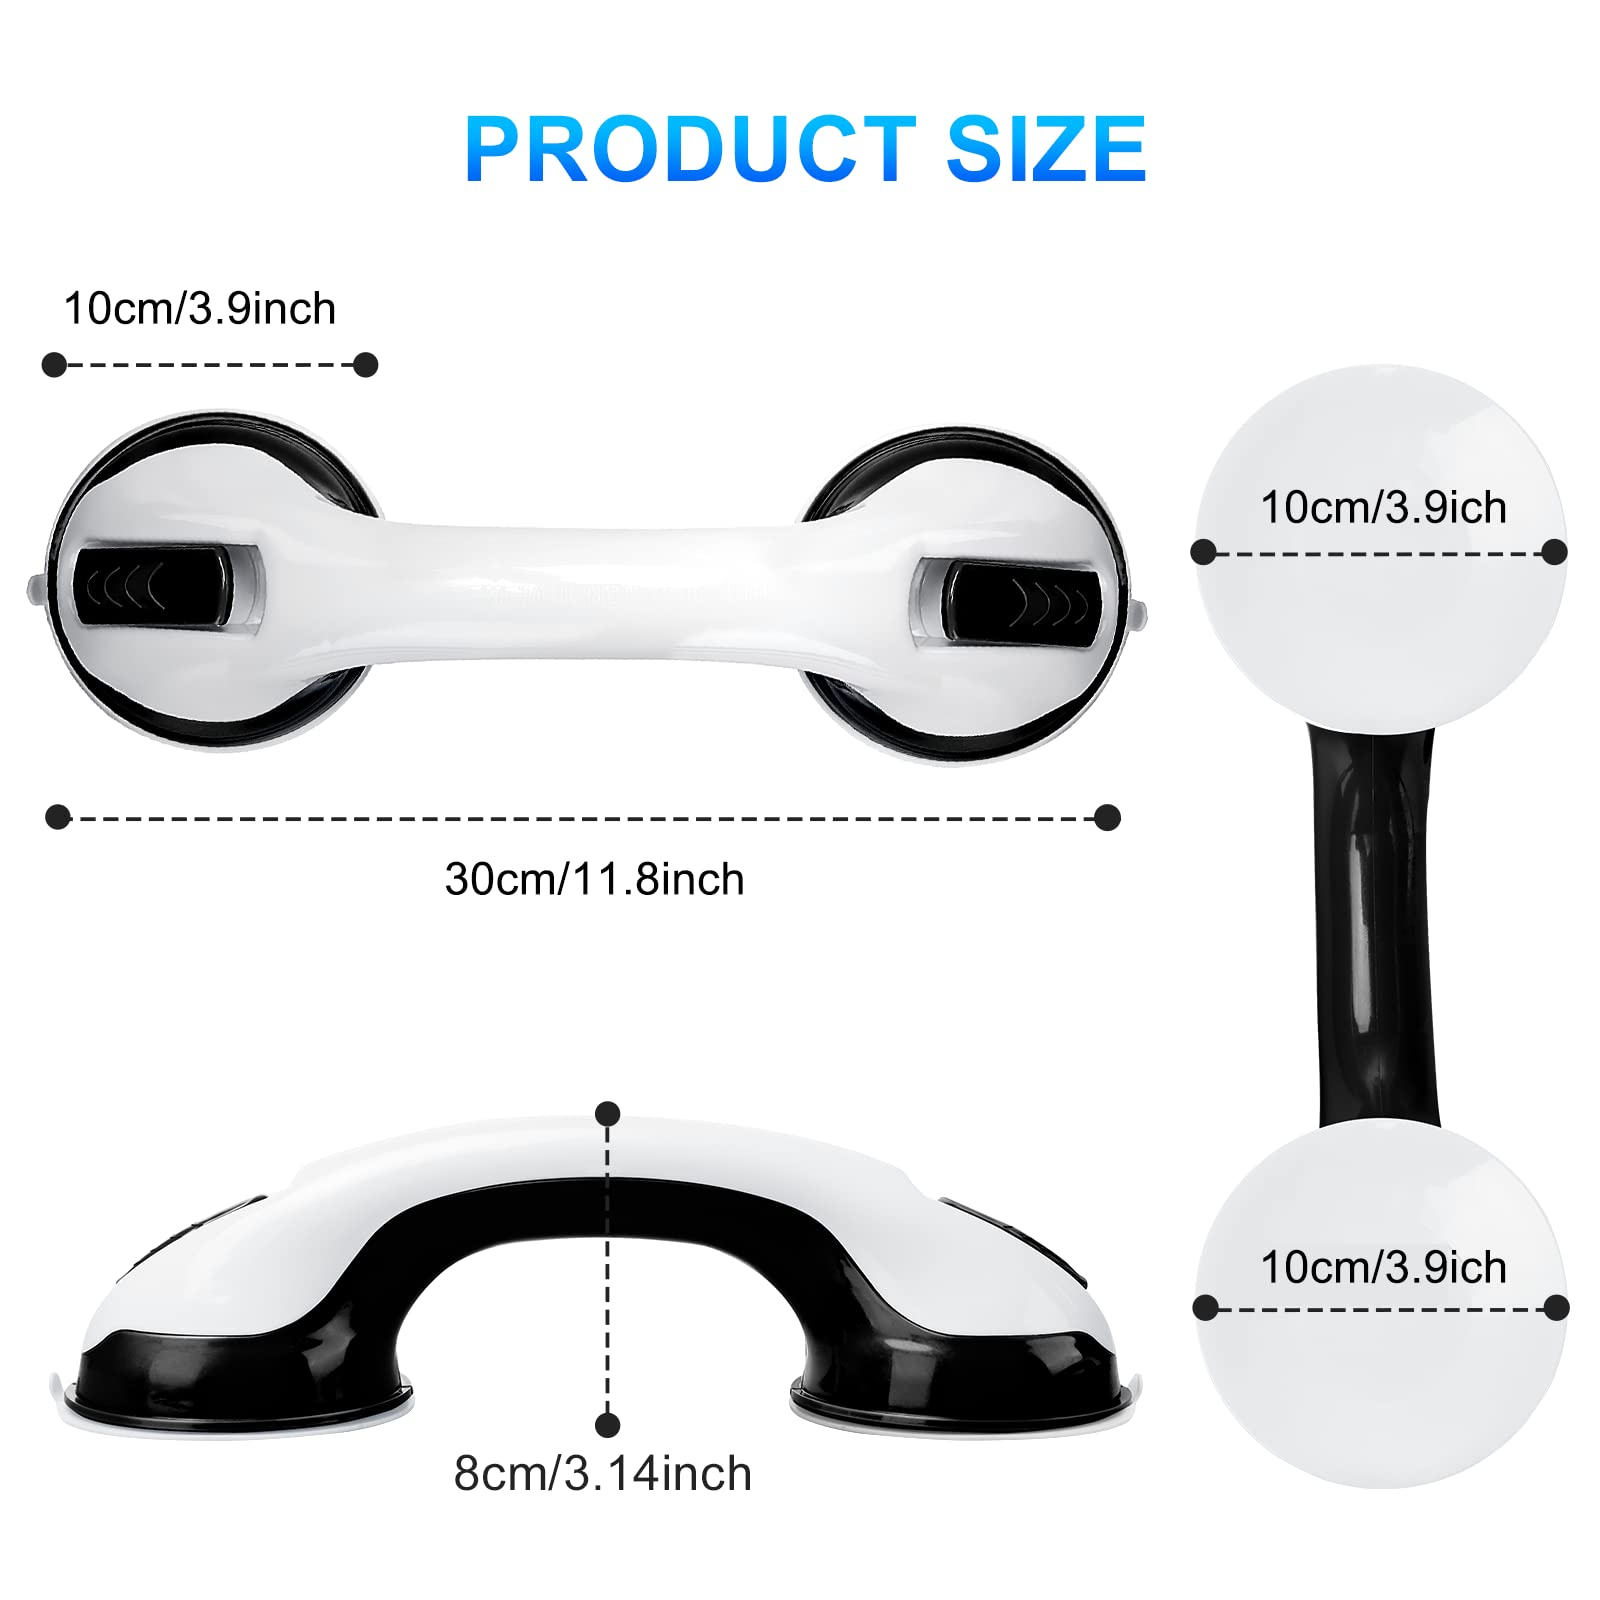 Shower Handle 12 inch Grab Bars for Bathroom Shower Handle with Strong Hold Suction Cup Grip Grab in Bathroom Bath Handle Grab Bars for Bathroom Safety Grab Bar Black